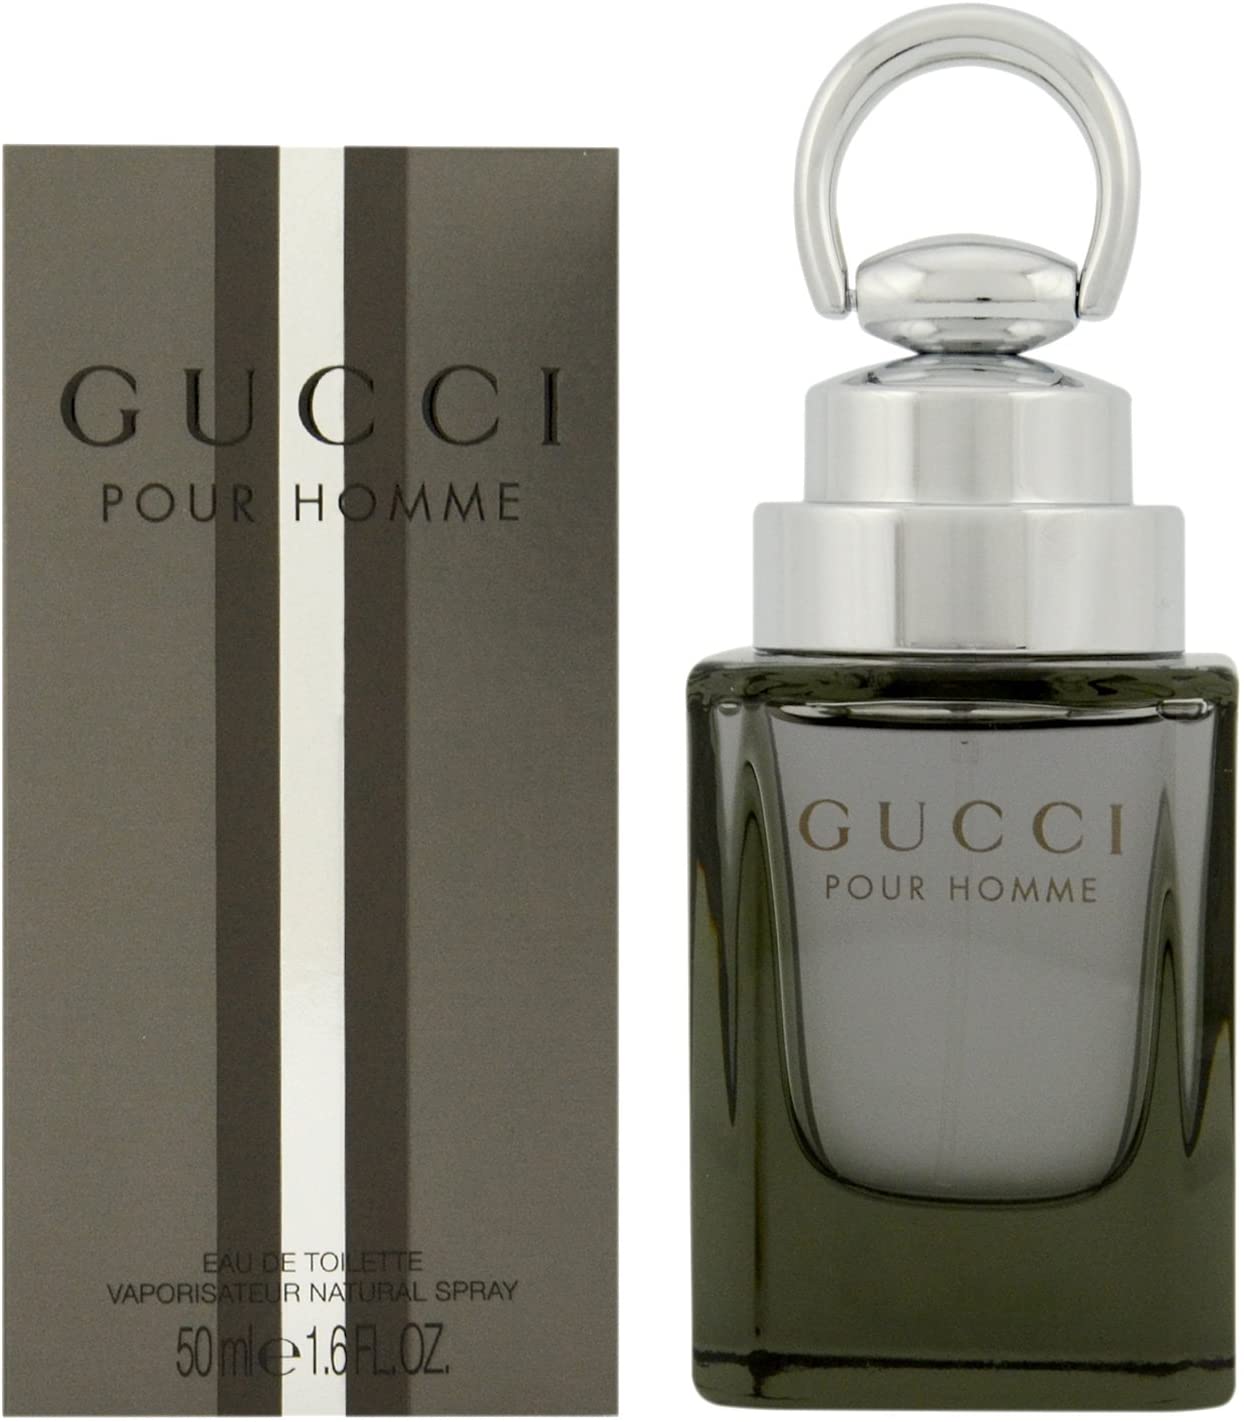 GUCCI – BY GUCCIPH EDT POUR HOMME 50mL